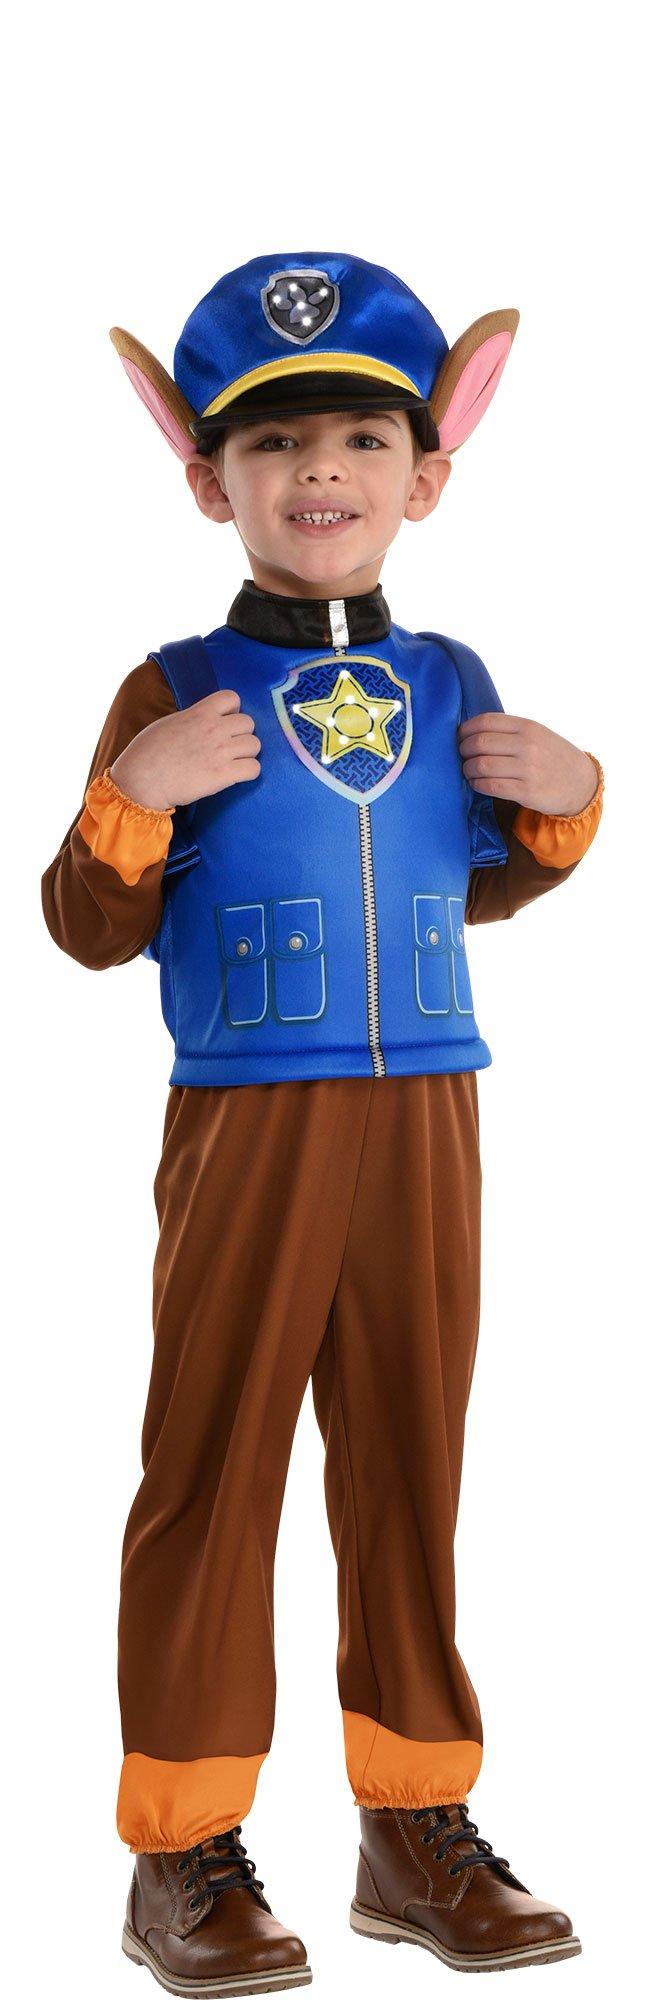 NWT paw patrol CHASE Toddler costume Sz 2T